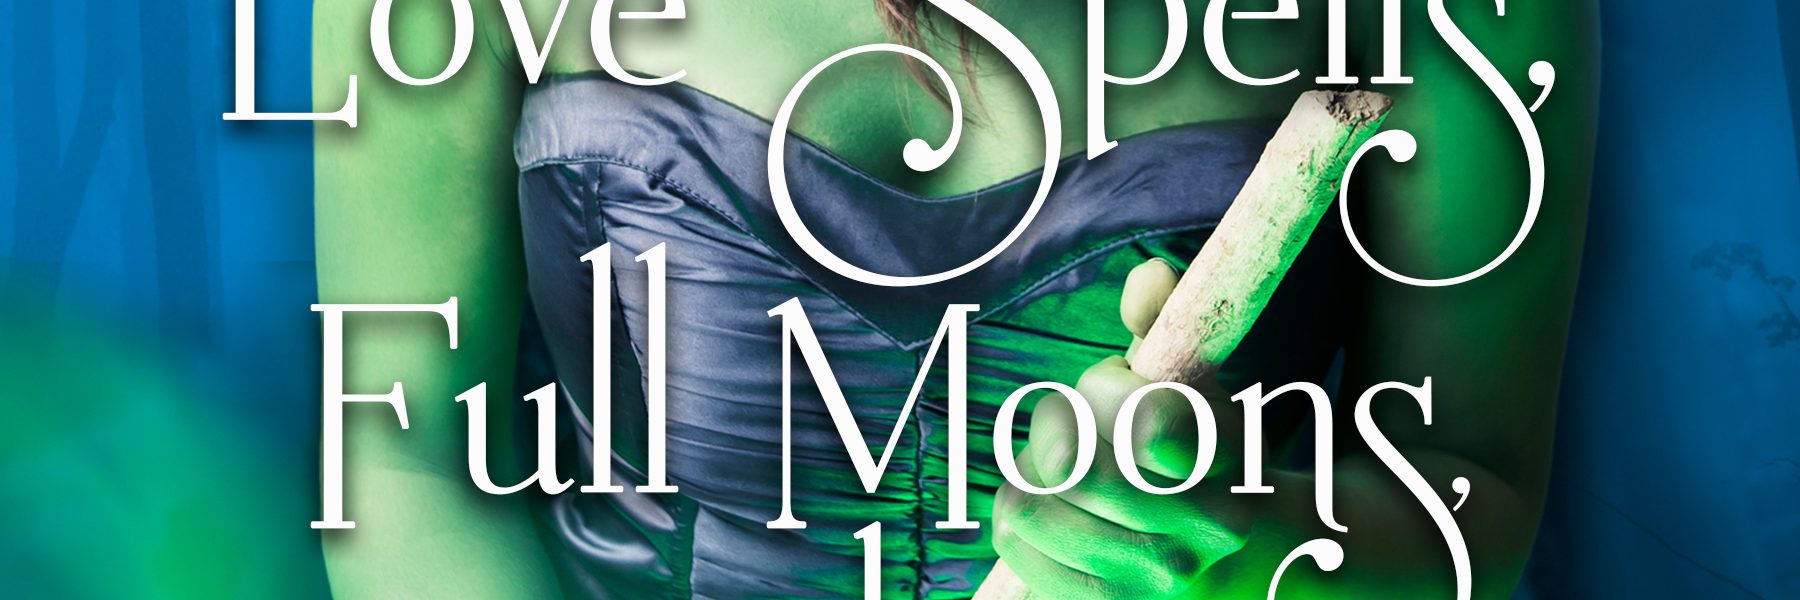 Hooked By That Book Review for Love Spells, Full Moons, and Silver Bullets by Cameron Allie